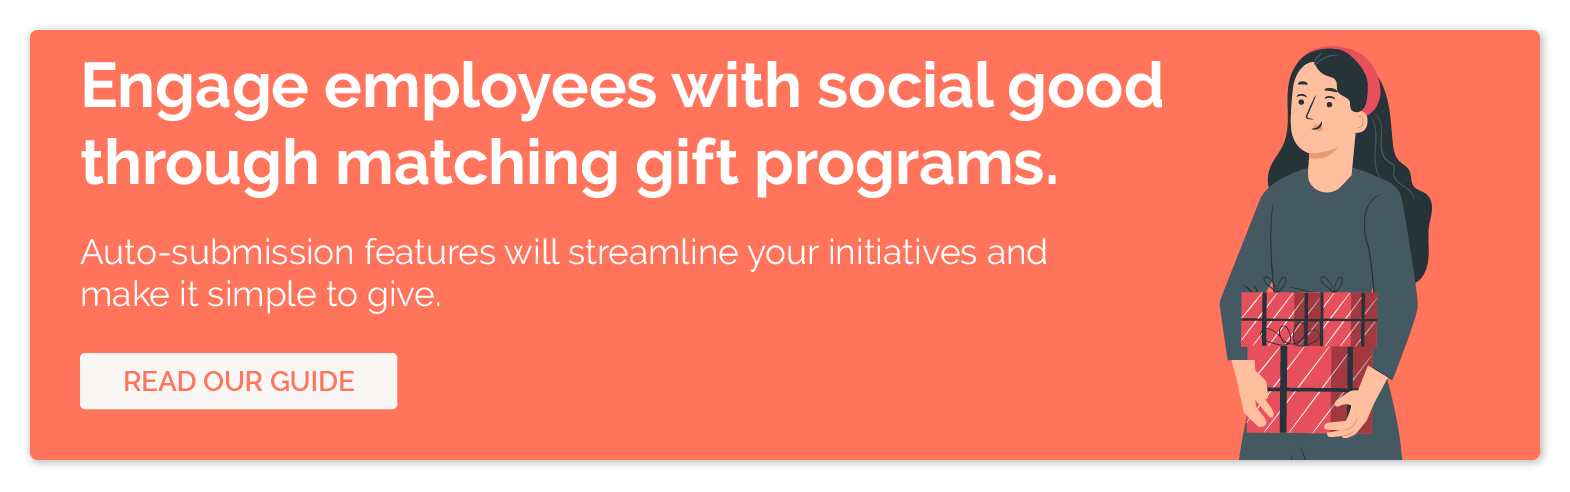 Click to learn more about matching gift auto-submission and how it helps employee engagement companies.